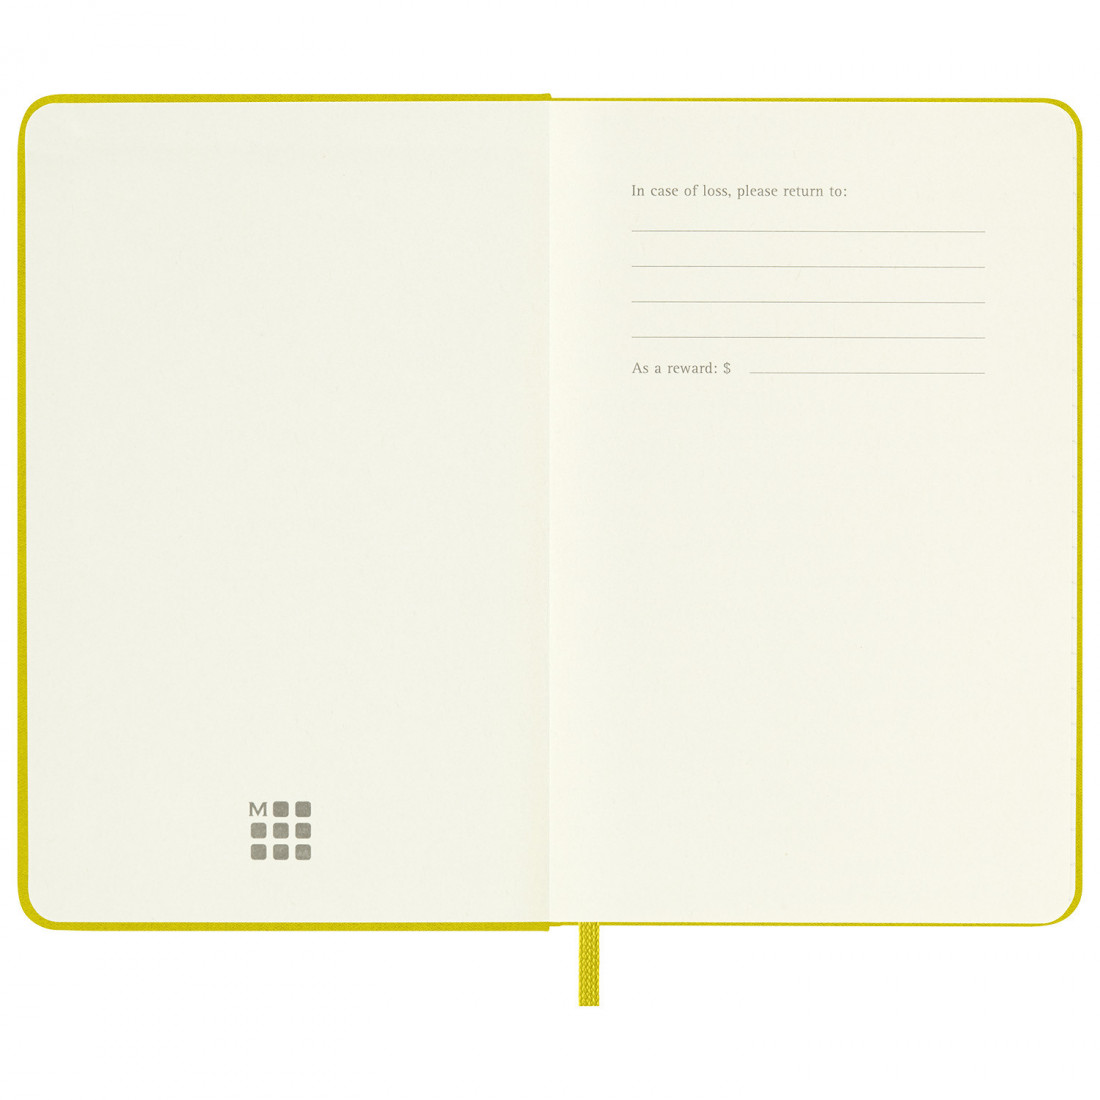 Notebook Large 13x21 Silk Hay Yellow Ruled Hard Cover Moleskine